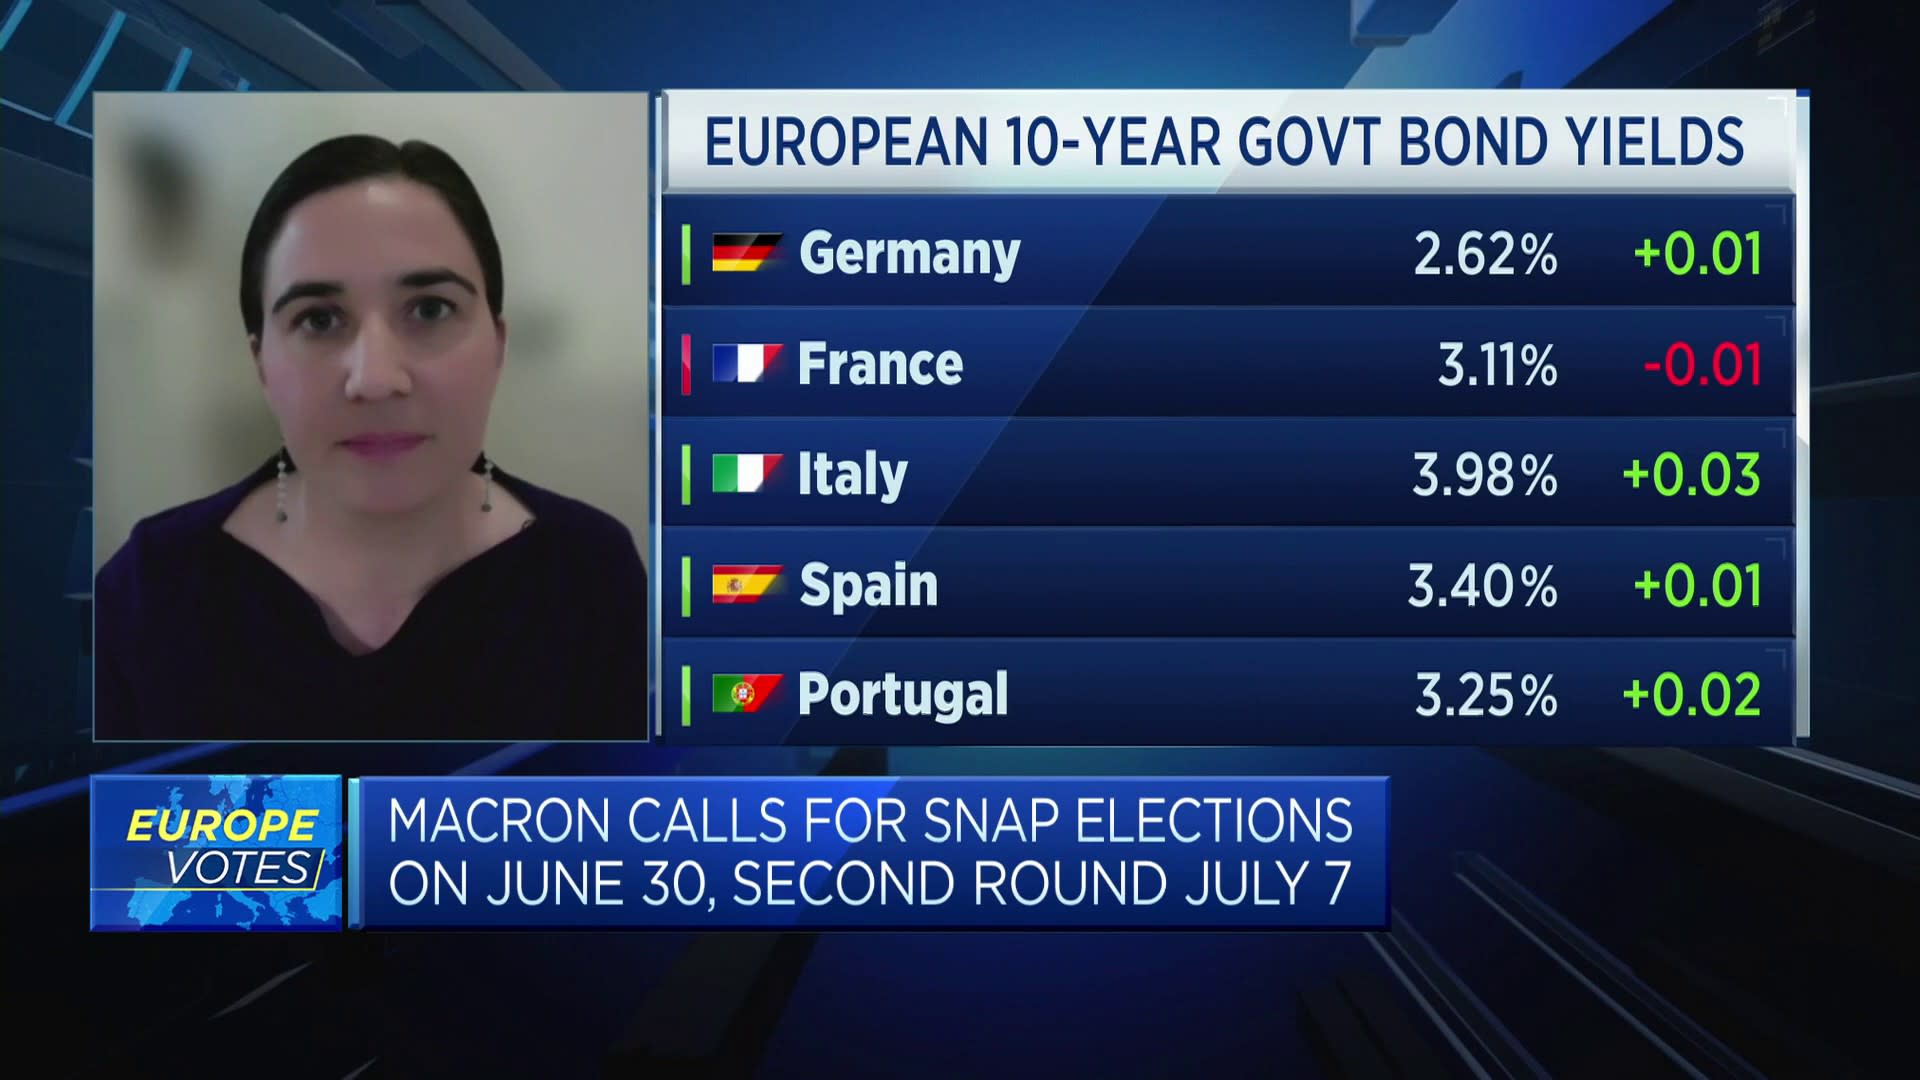 Deutsche Bank Research: Difficult to say what will happen in France snap election